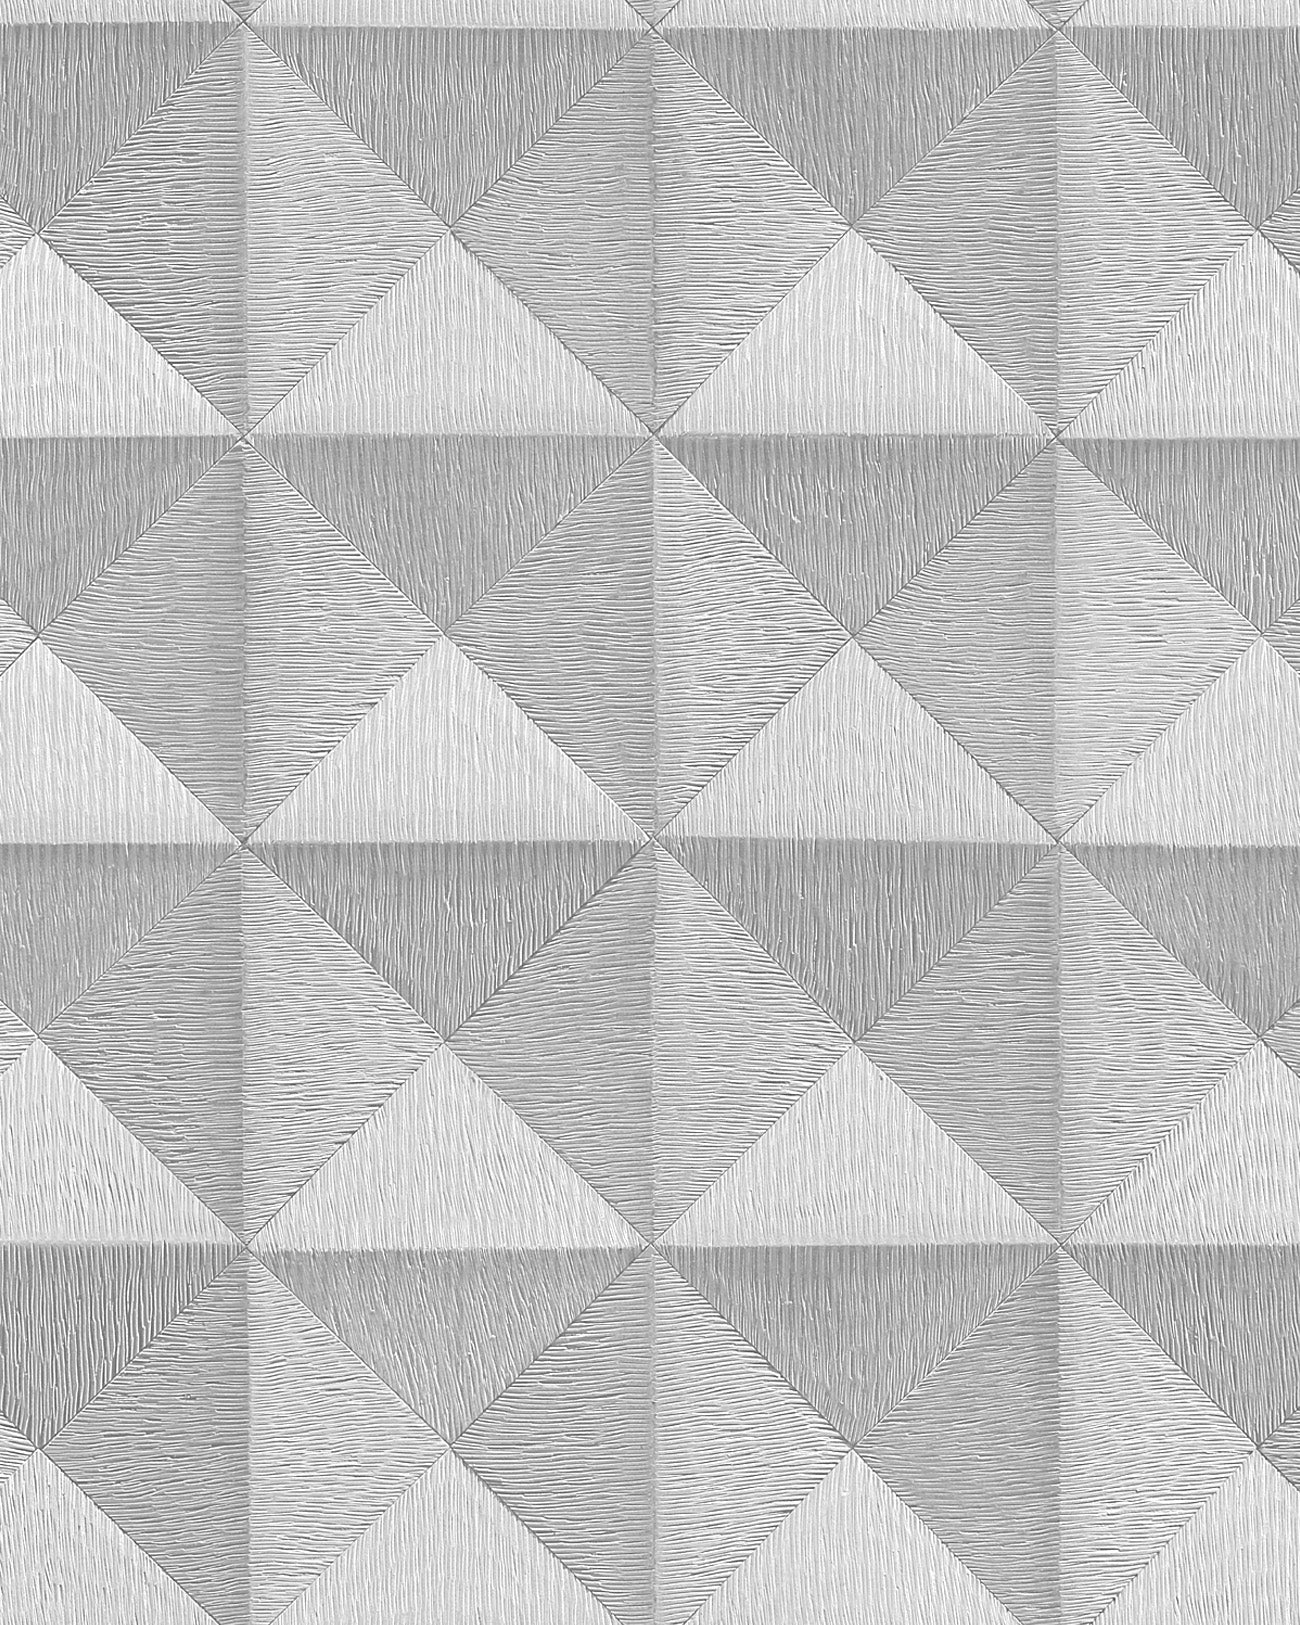 Graphic pattern wallpaper Profhome BA220061-DI hot embossed non-woven wallpaper with graphic design and silver metallic accents 5.33 m2